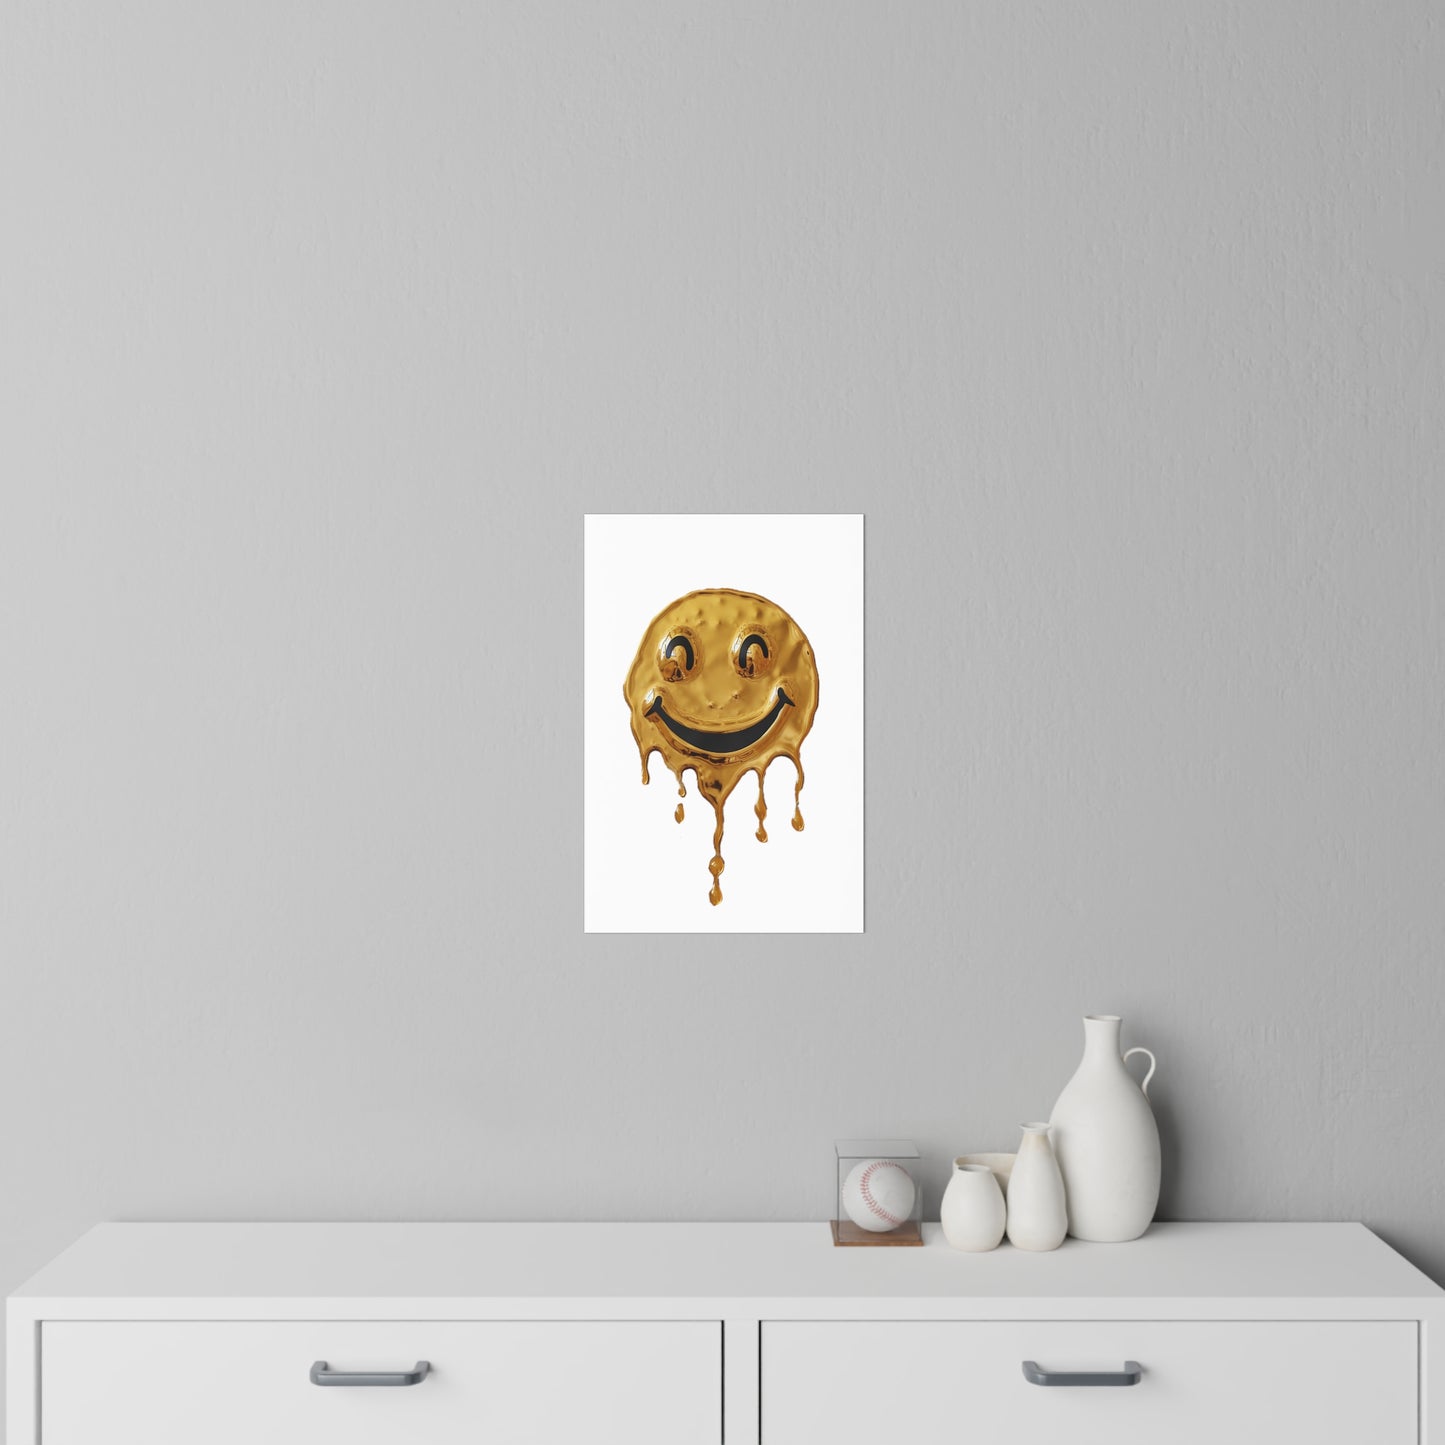 Dripping Gold Smiley Wall Decal